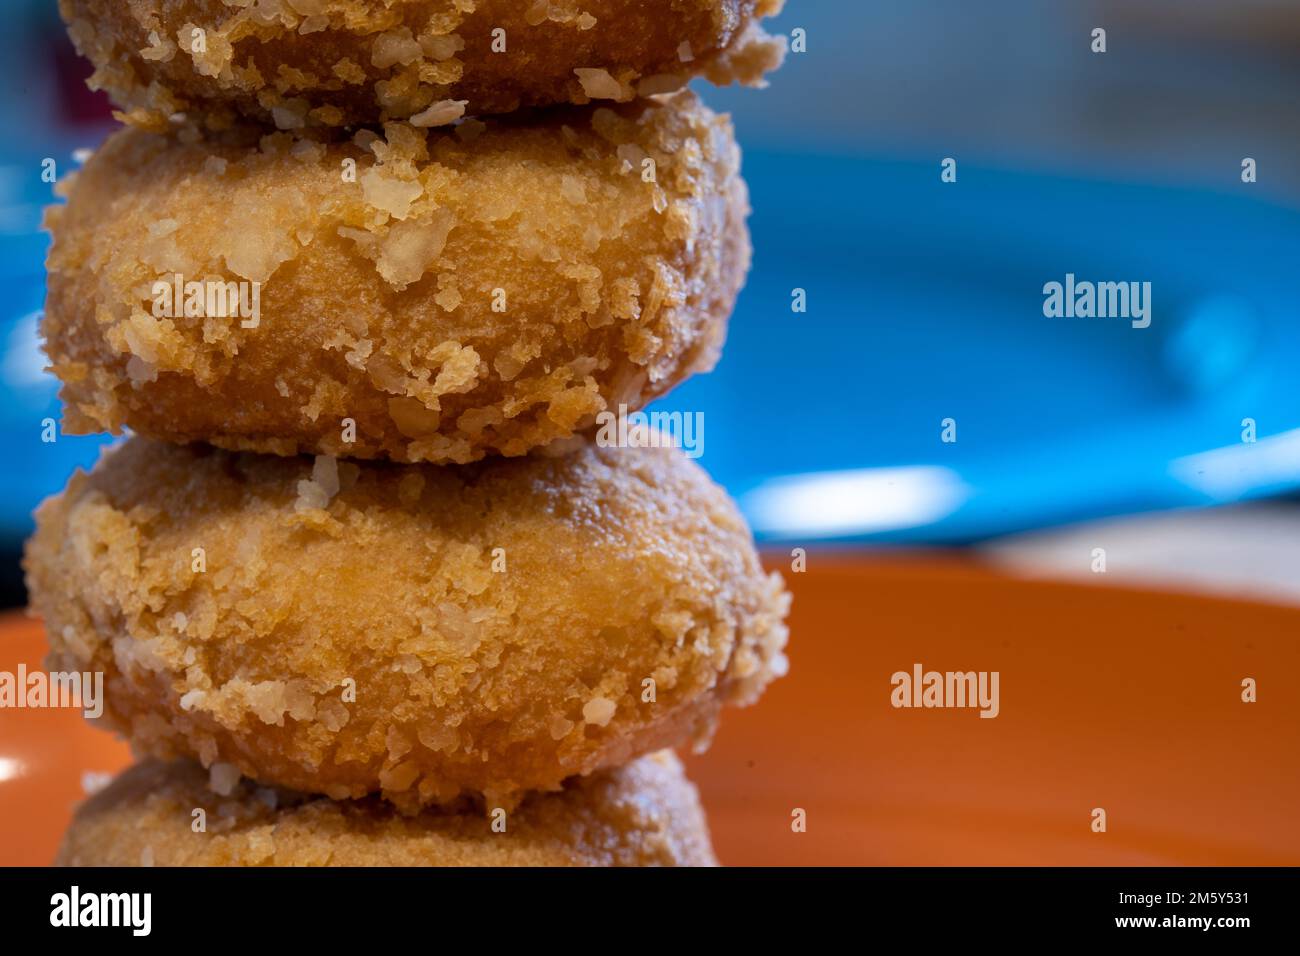 Stack of doughnuts Stock Photo